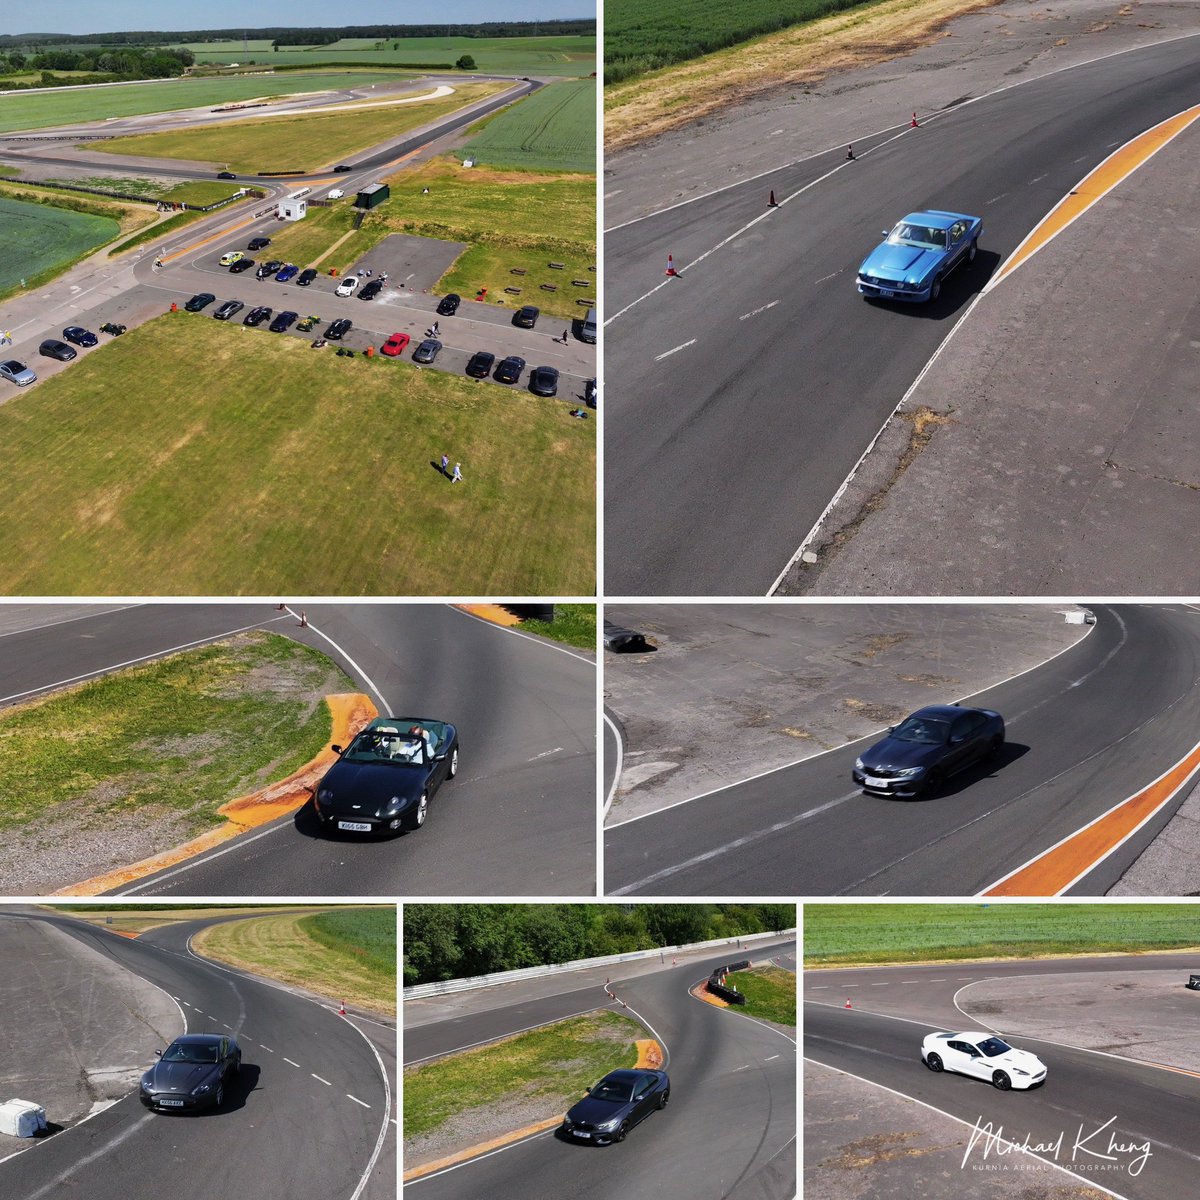 Another superb track day for the Aston Martin Owners Club today. Full entry of 40 members. 🎥🎬

#DroneProduction #CommercialDrones #AerialProduction #DroneVideography #AerialFilming #DroneFilming  #DroneServices #DroneAdvertising #DroneMarketing #AerialMarketing